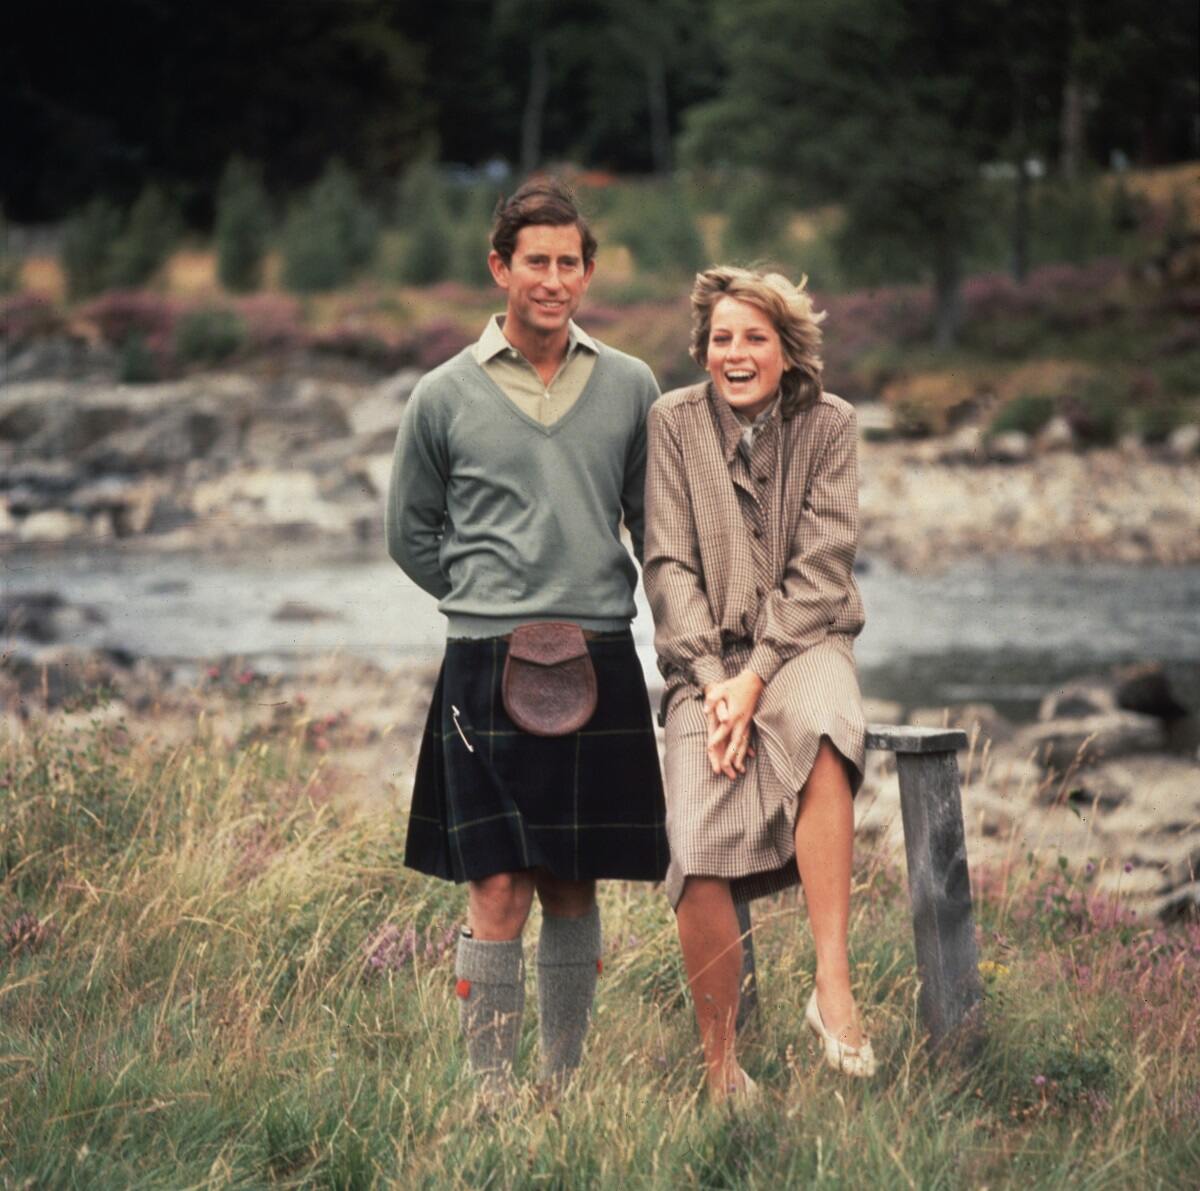 King Charles III and Princess Diana pose for a photo on their honeymoon in 1981 at Balmoral Castle in Scotland.